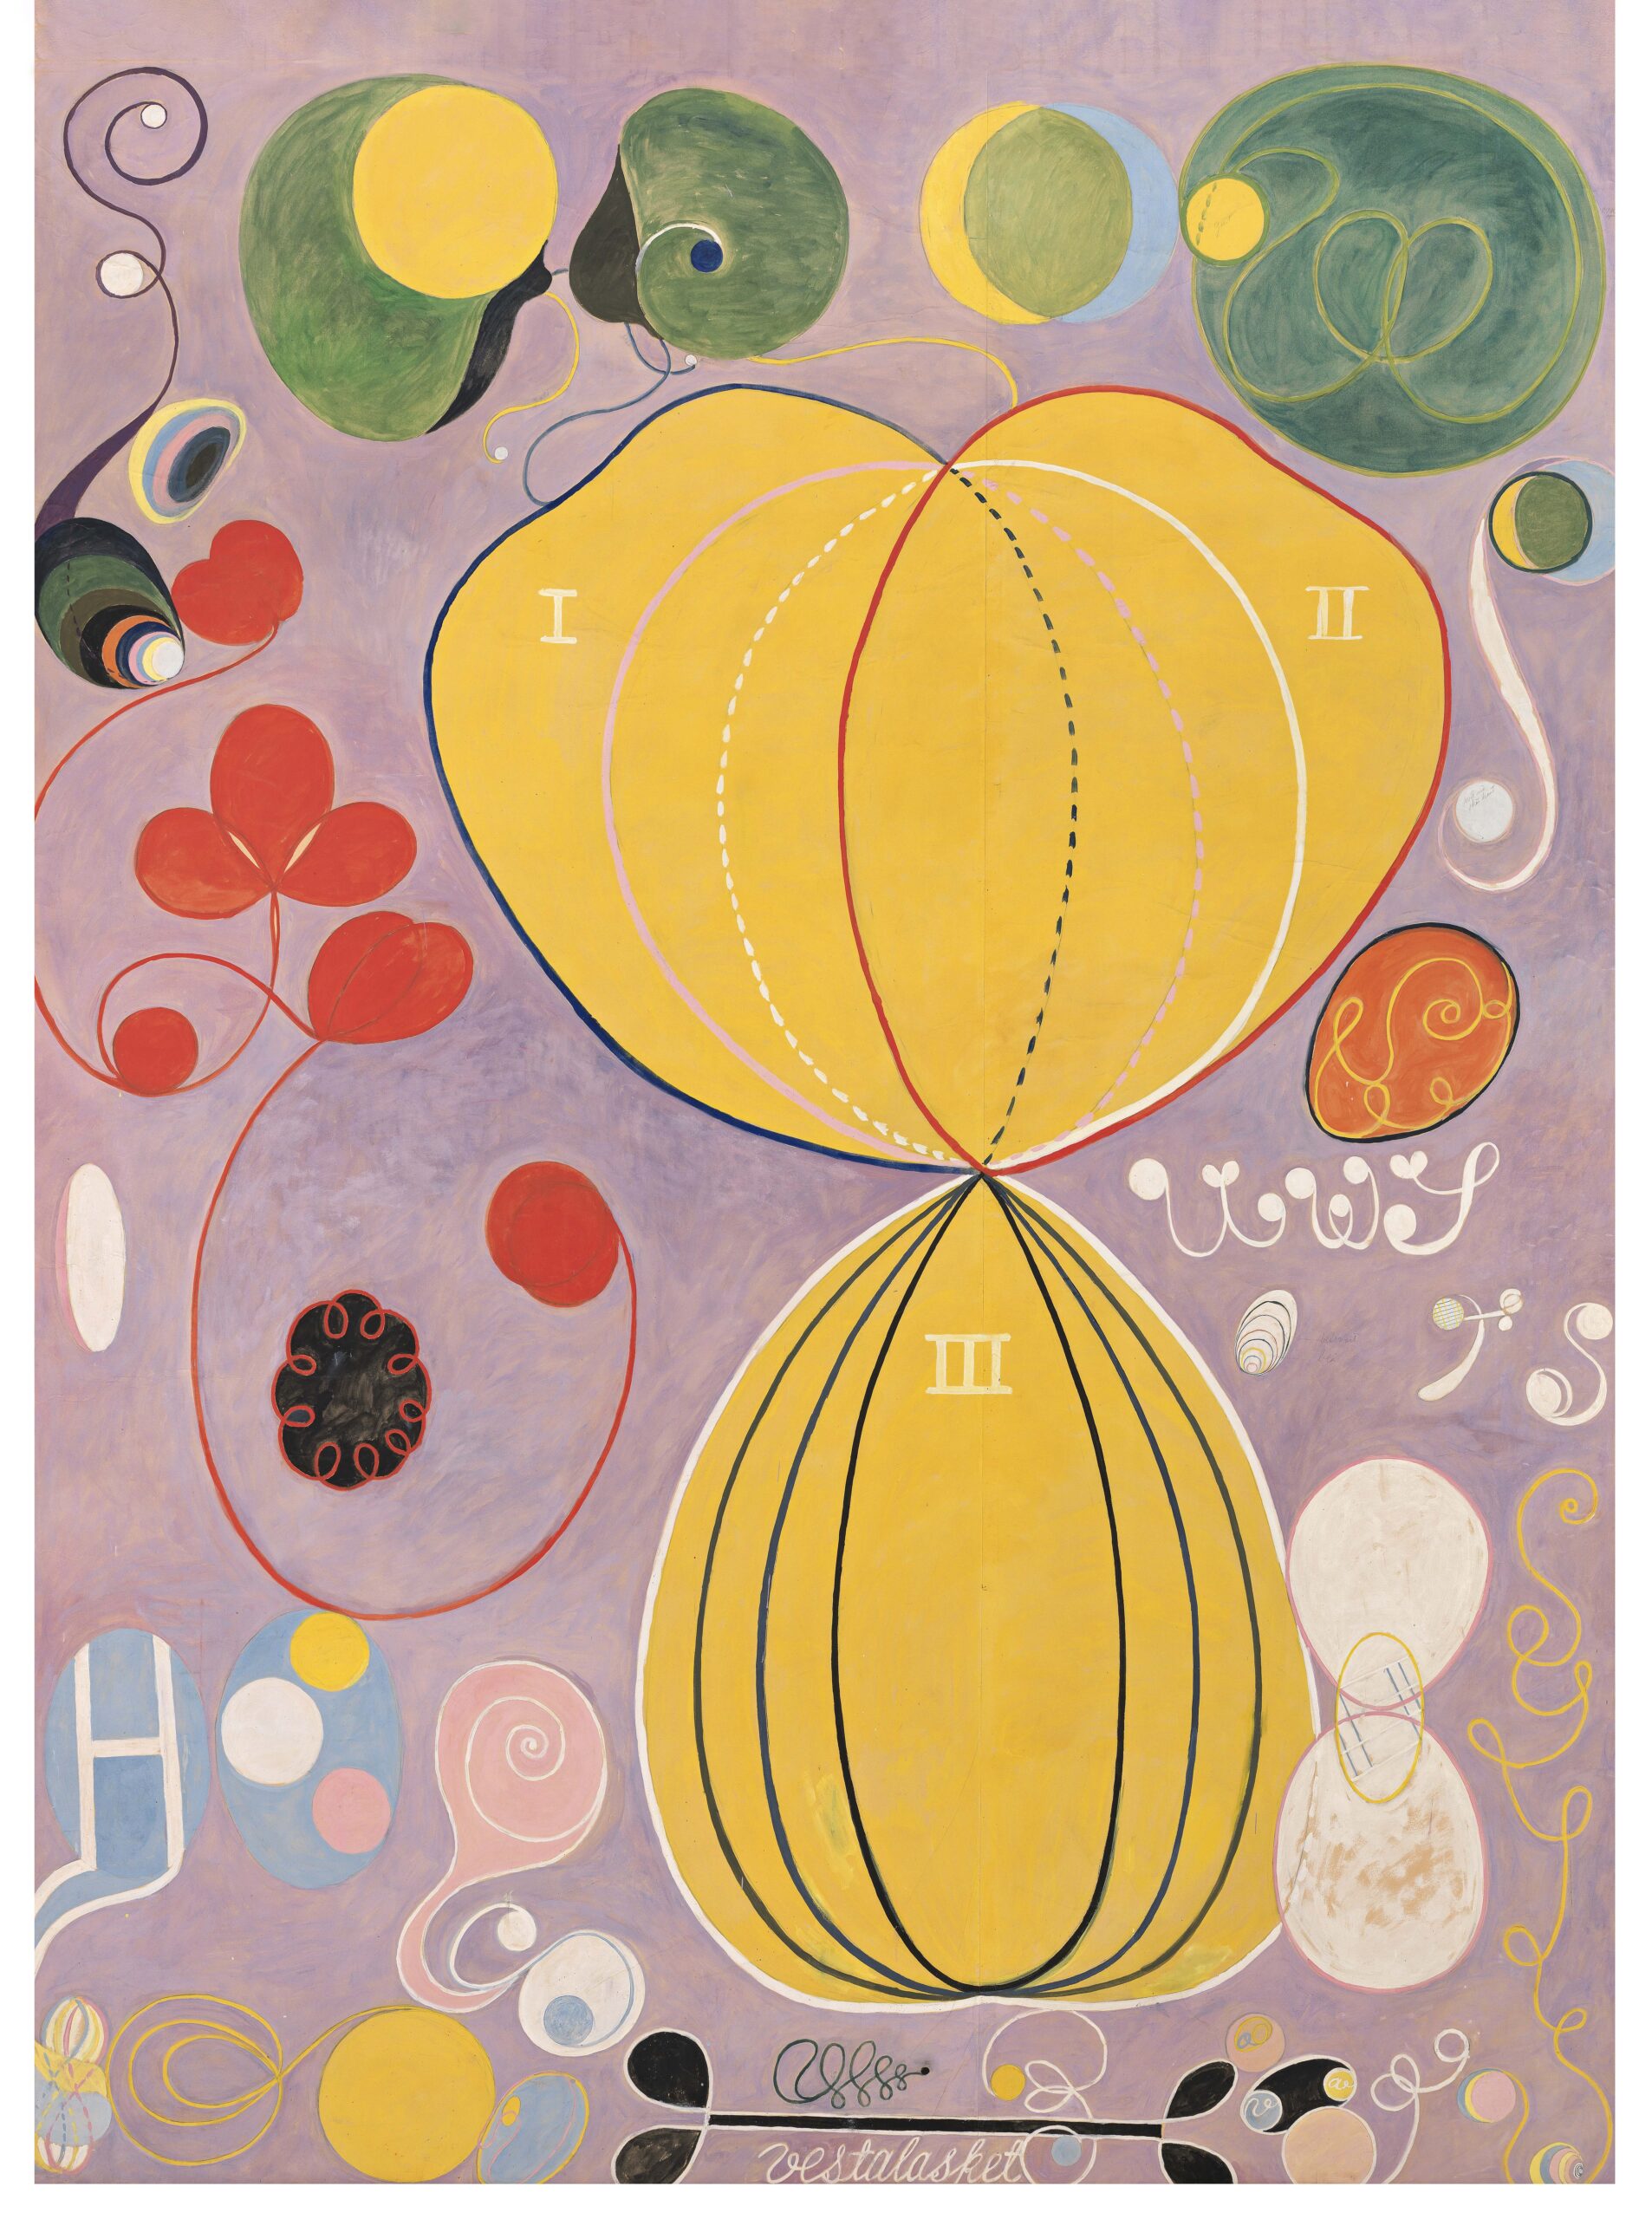 The Ten Largest, No. 7, Adulthood by Kilma af Klint